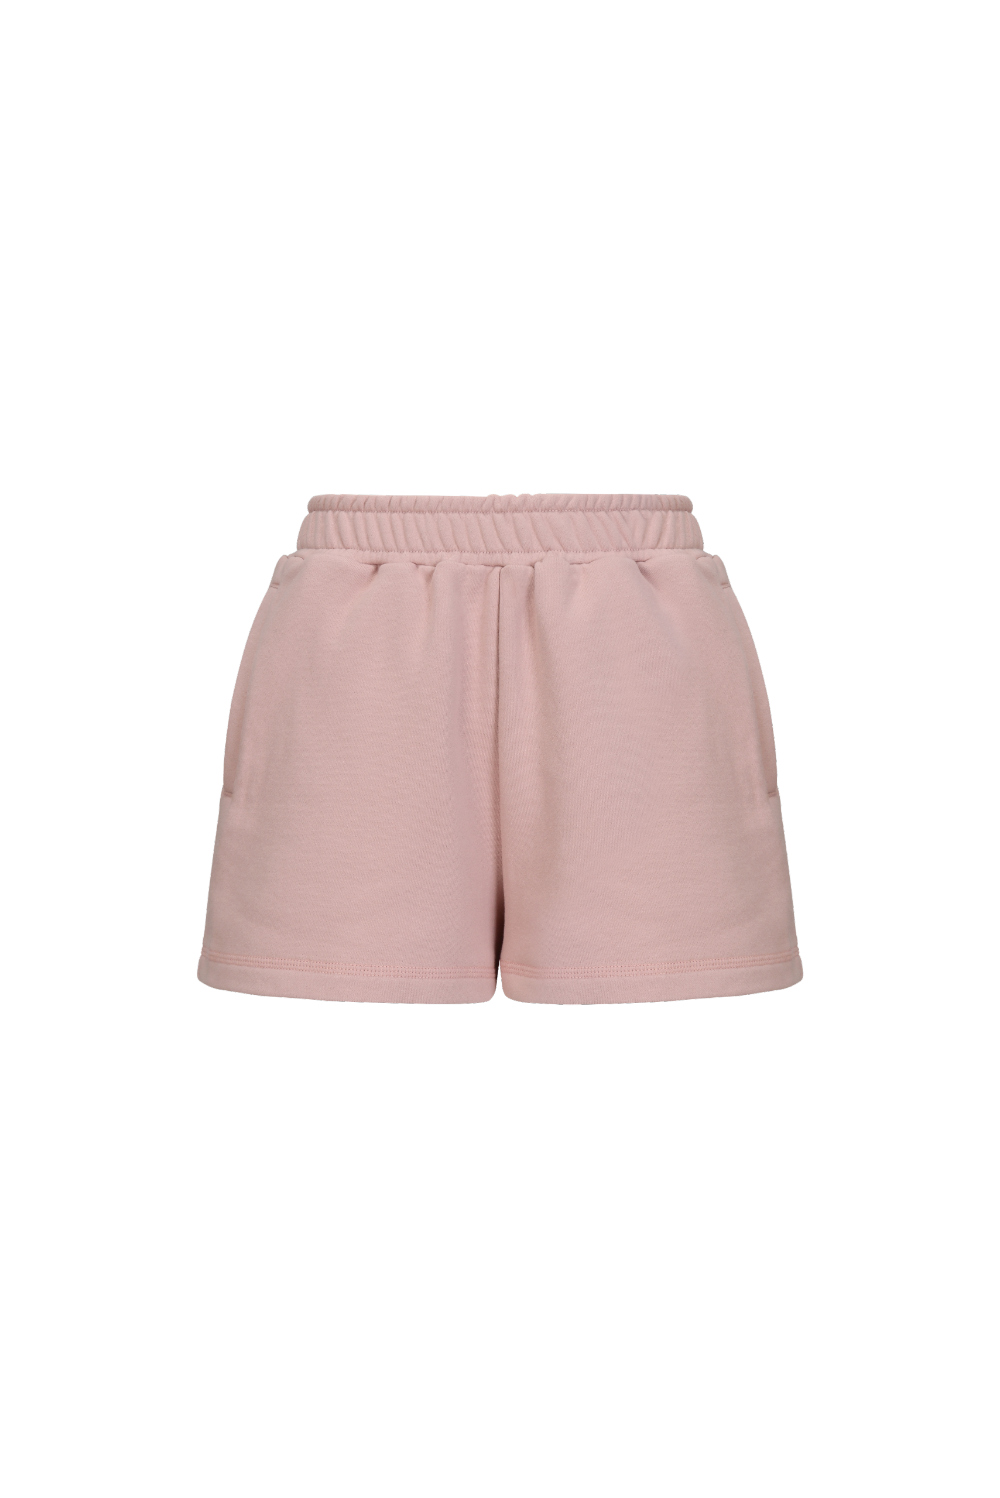 shorts baby pink color image-S2L1